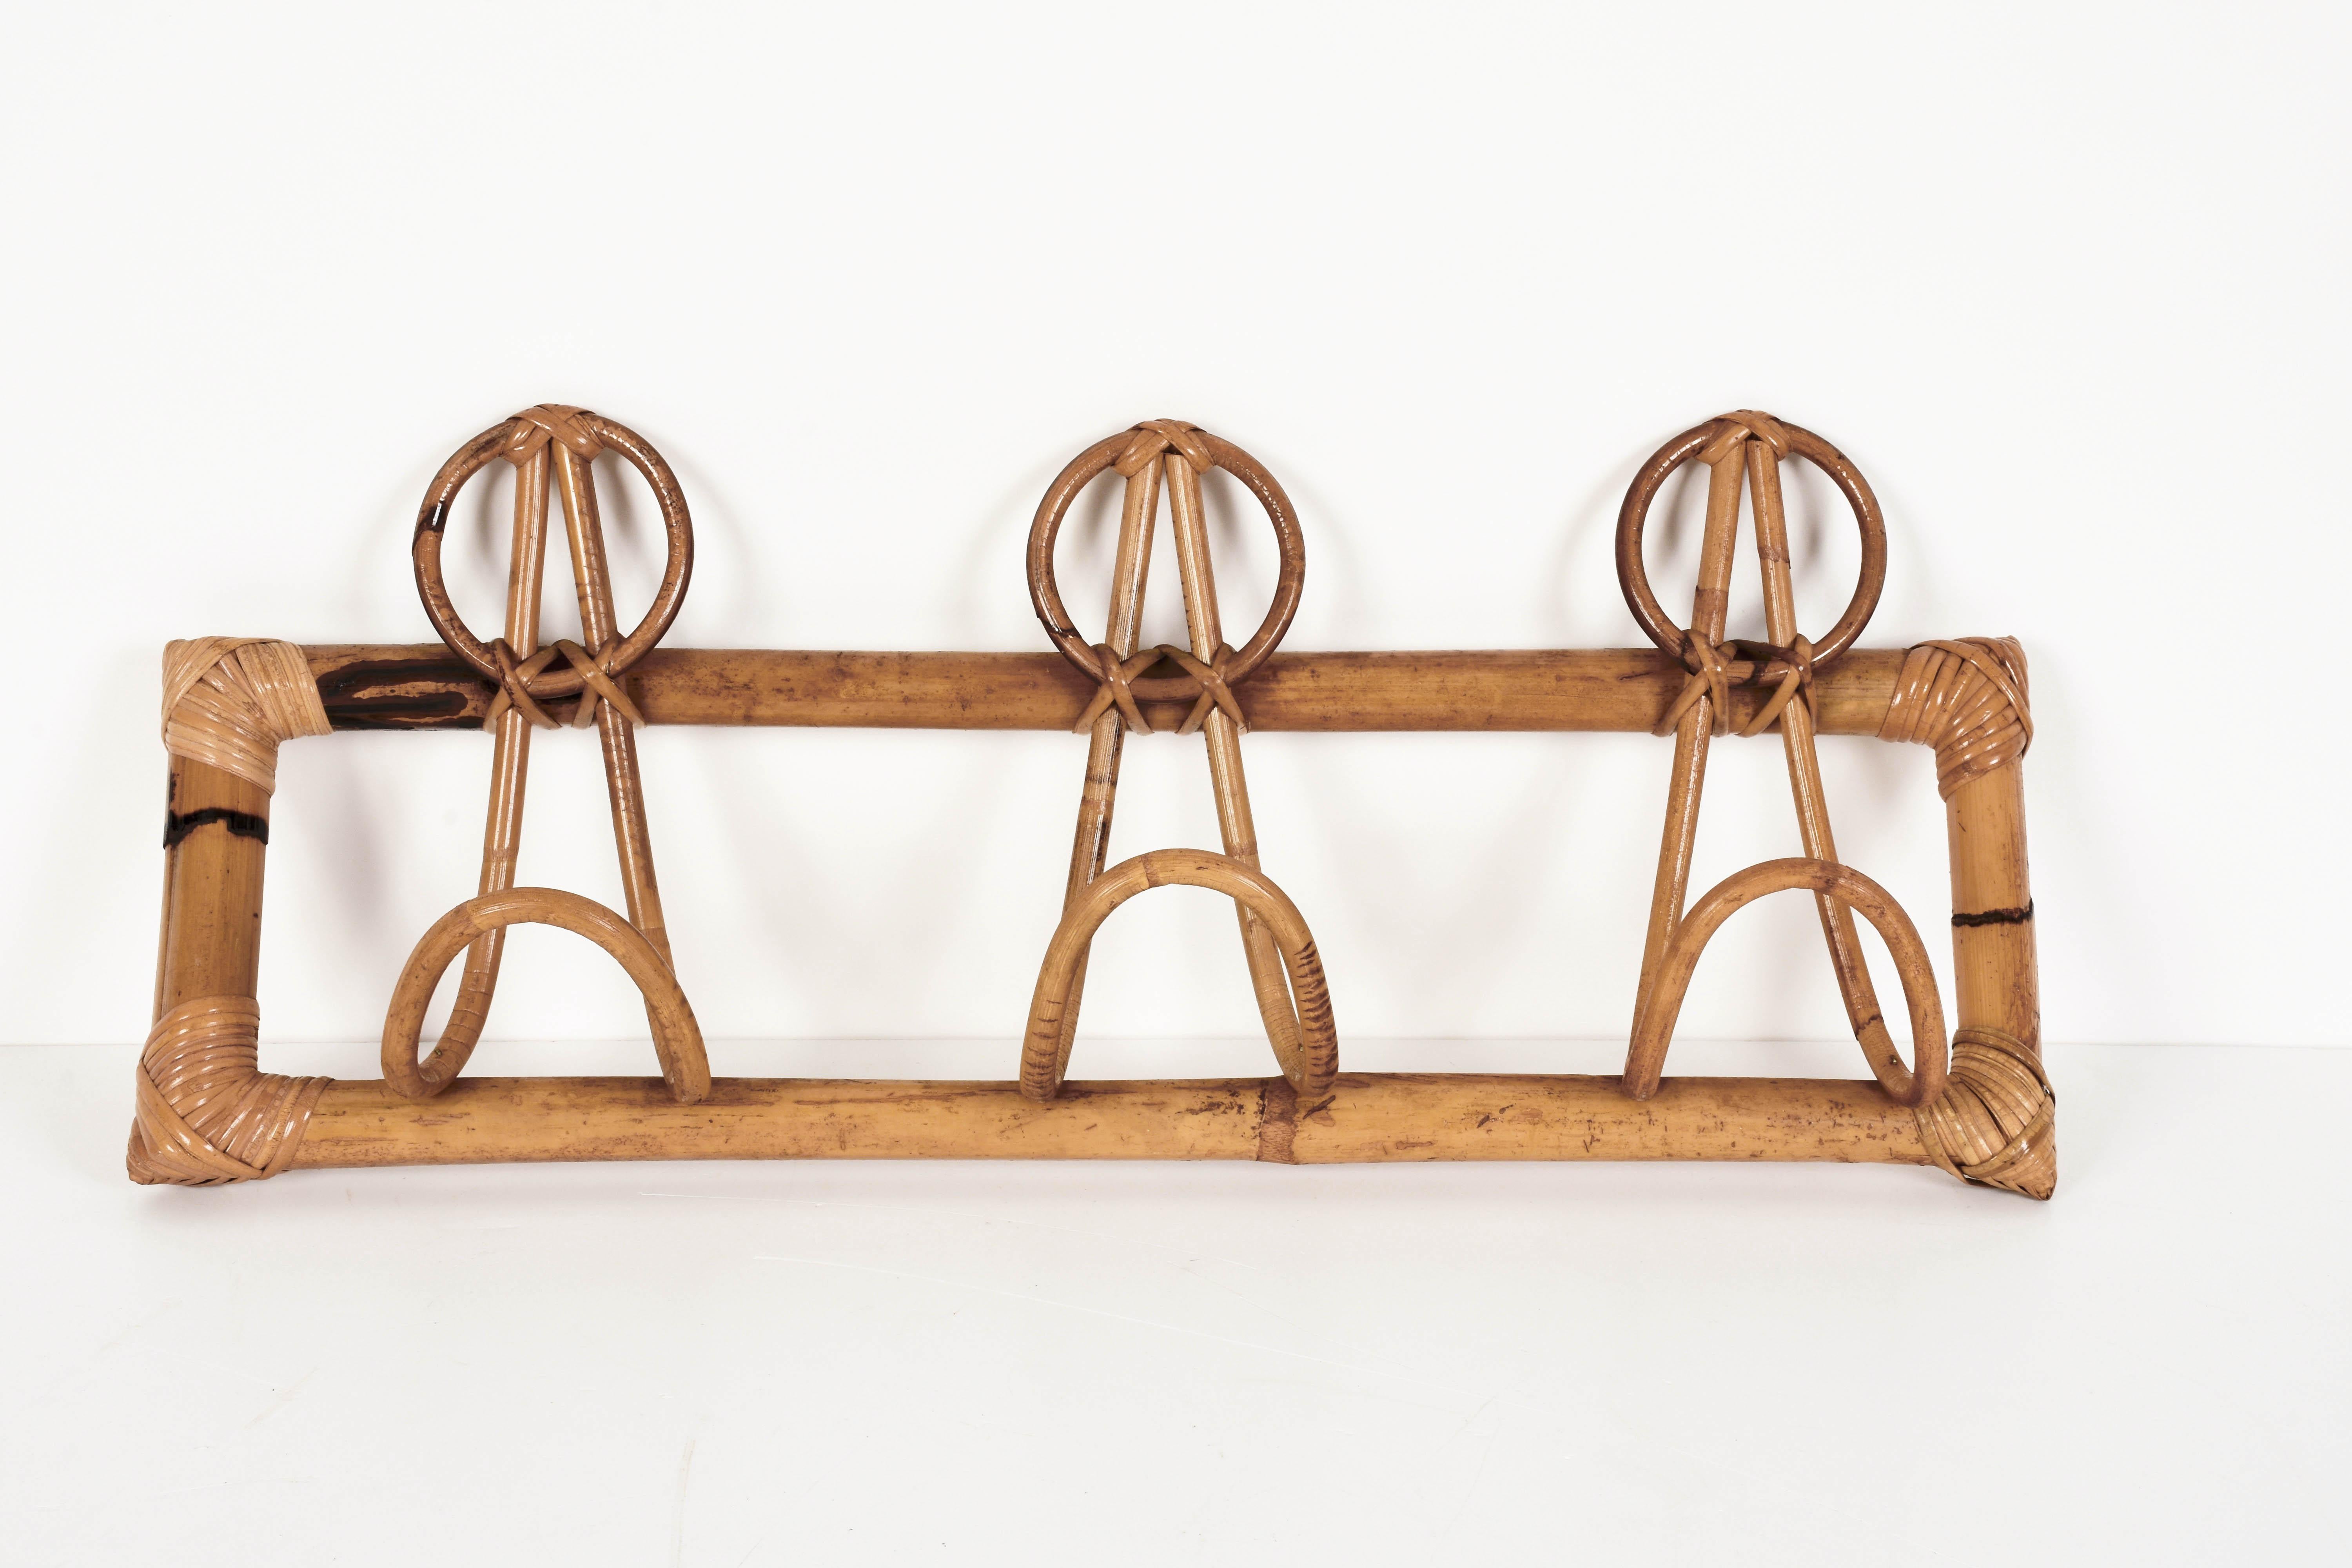 Midcentury French Riviera Rattan and Bamboo Italian Coat Rack, 1960s For Sale 3